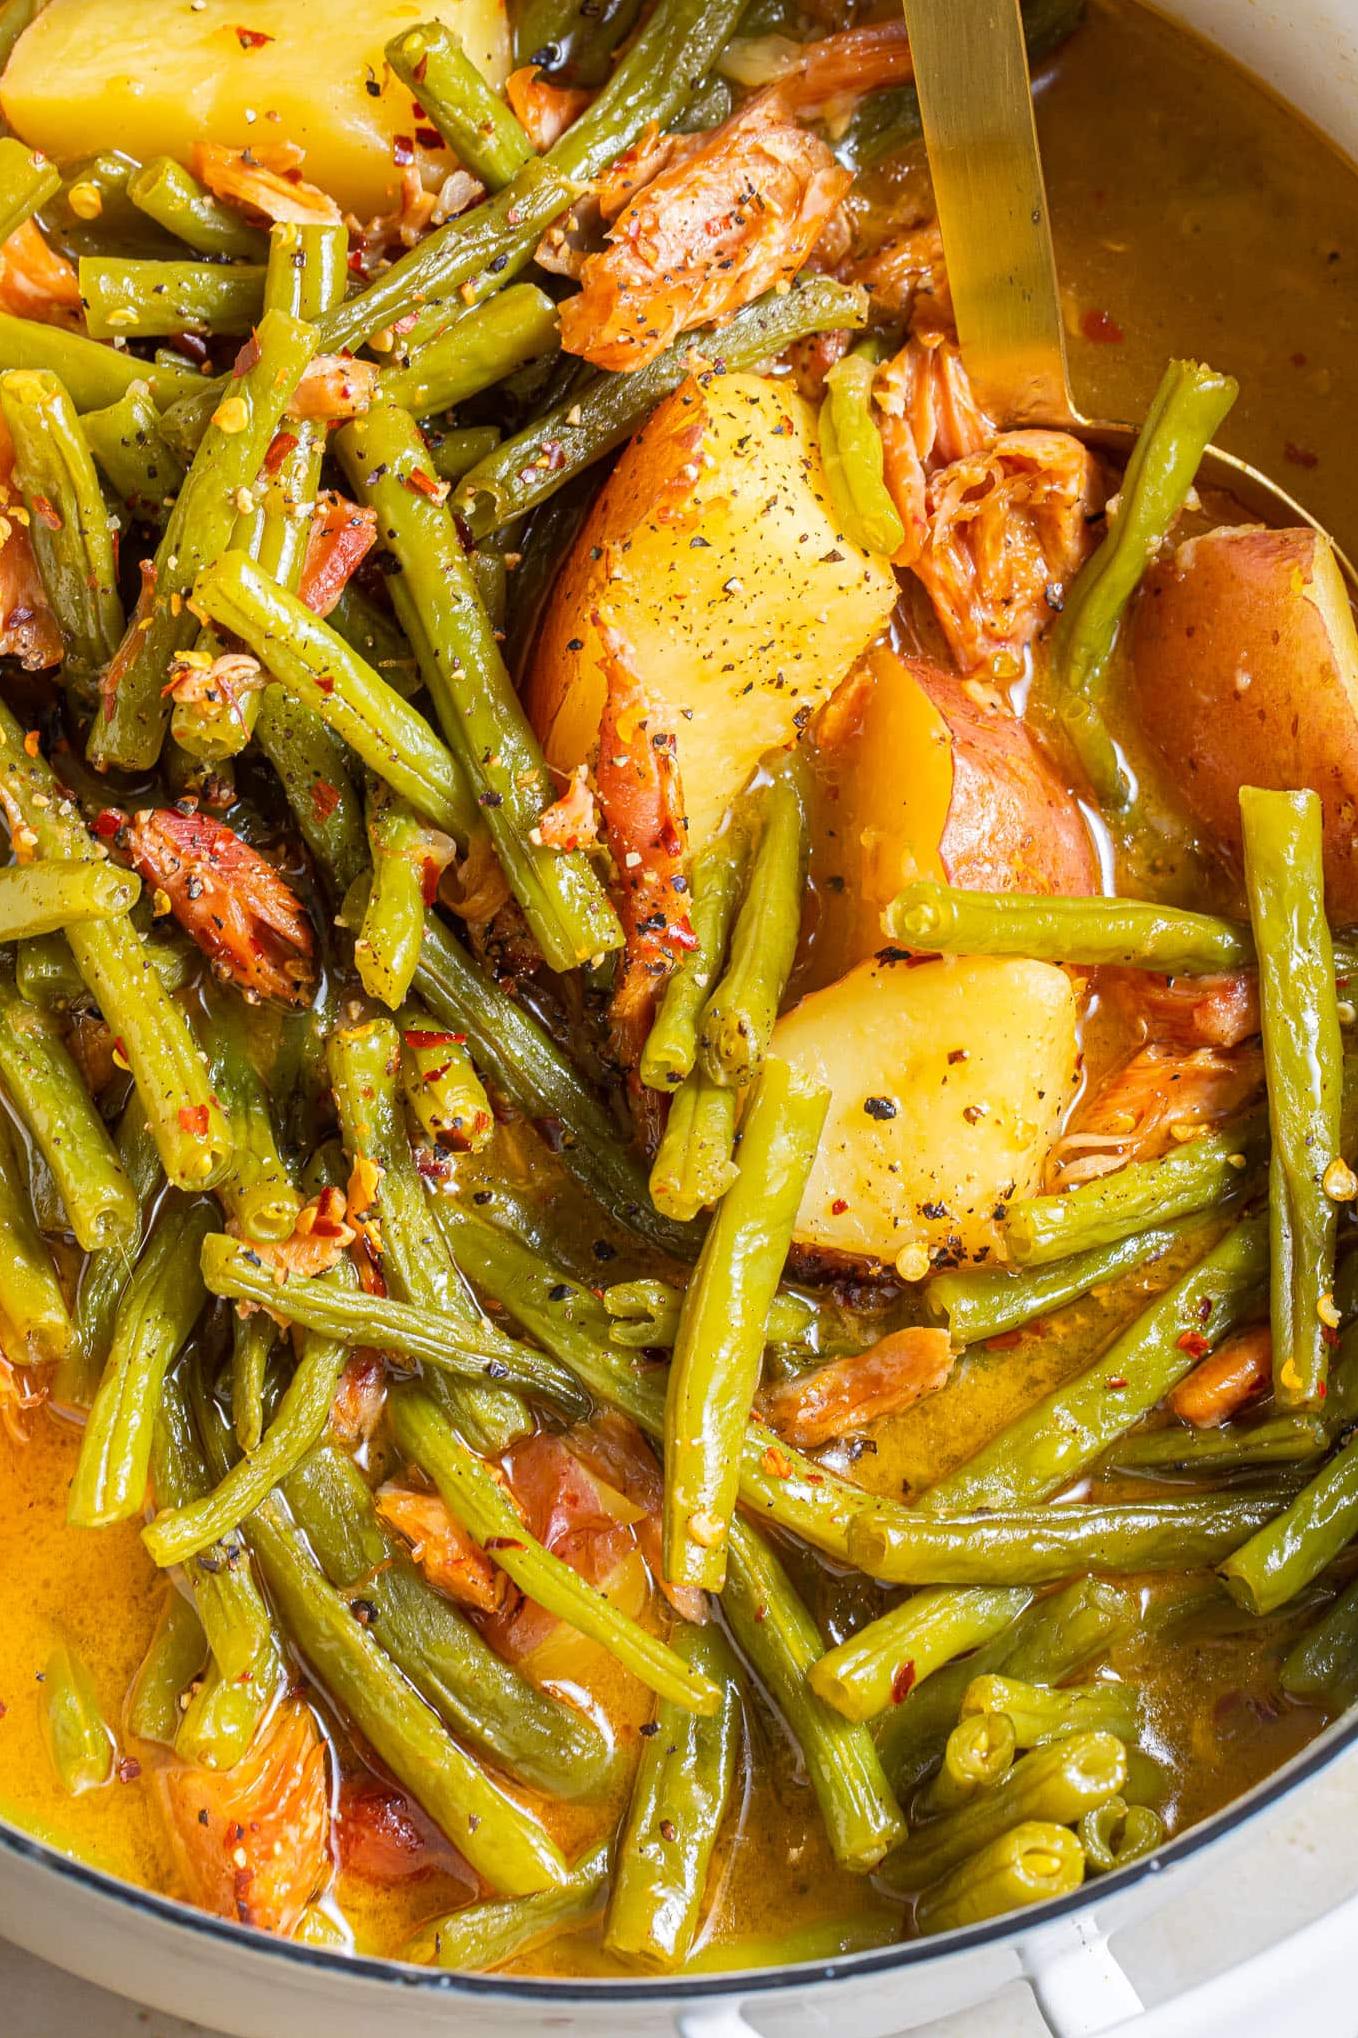  A classic southern dish that will have you coming back for seconds.